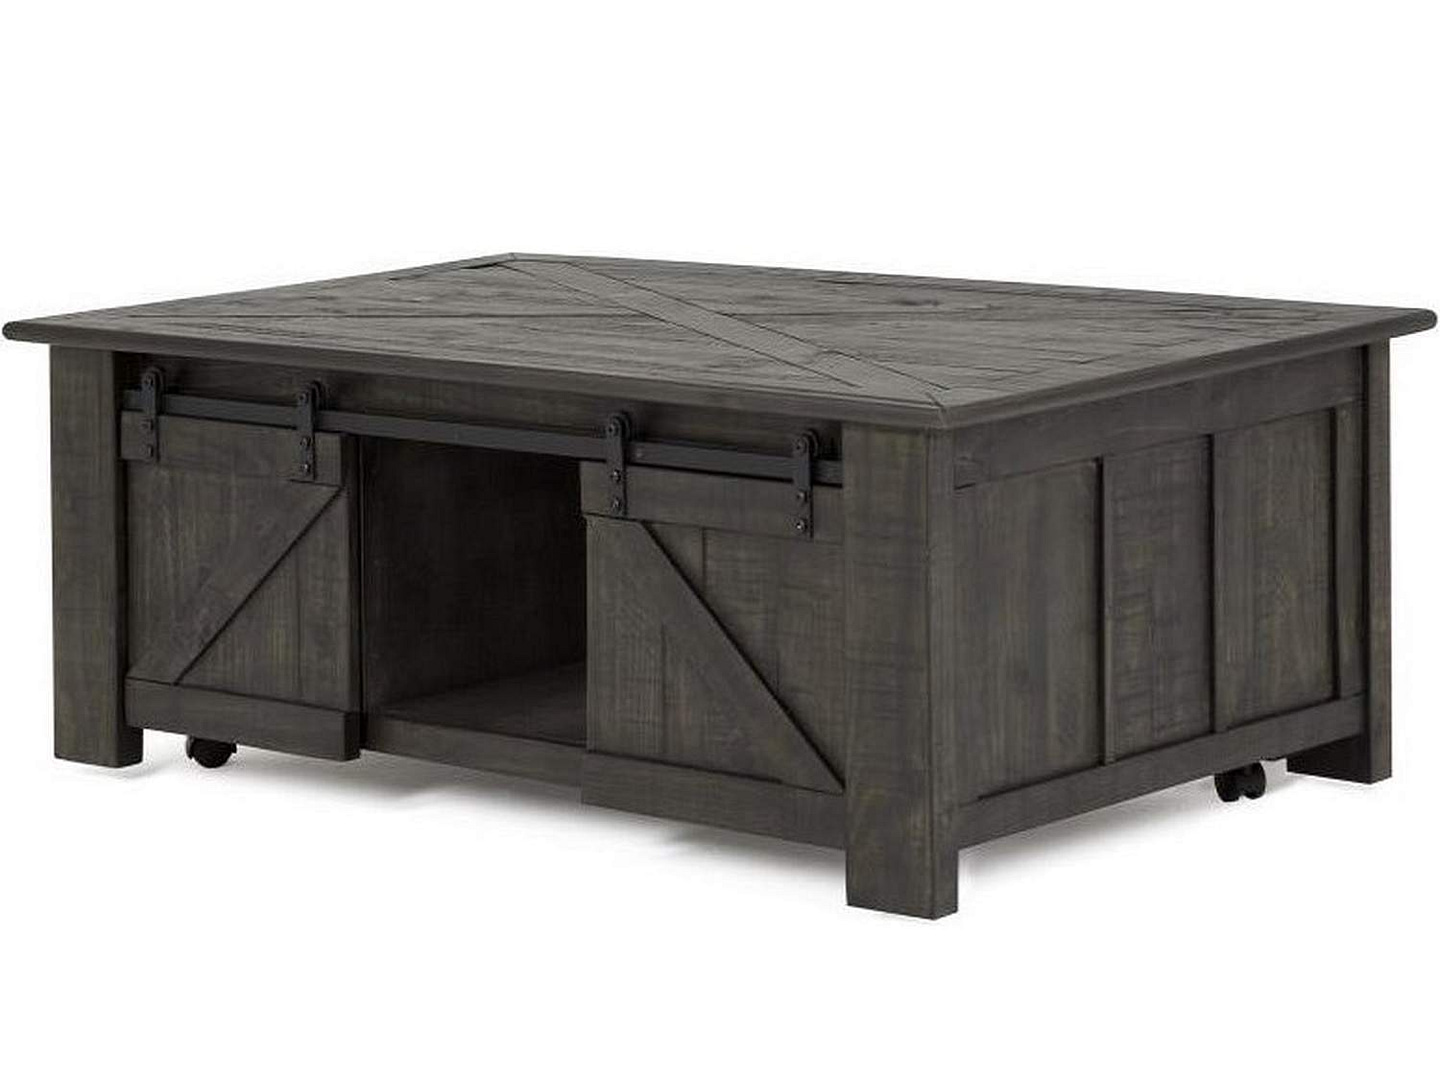 FARGO Lift-Top Coffee Table - Closed